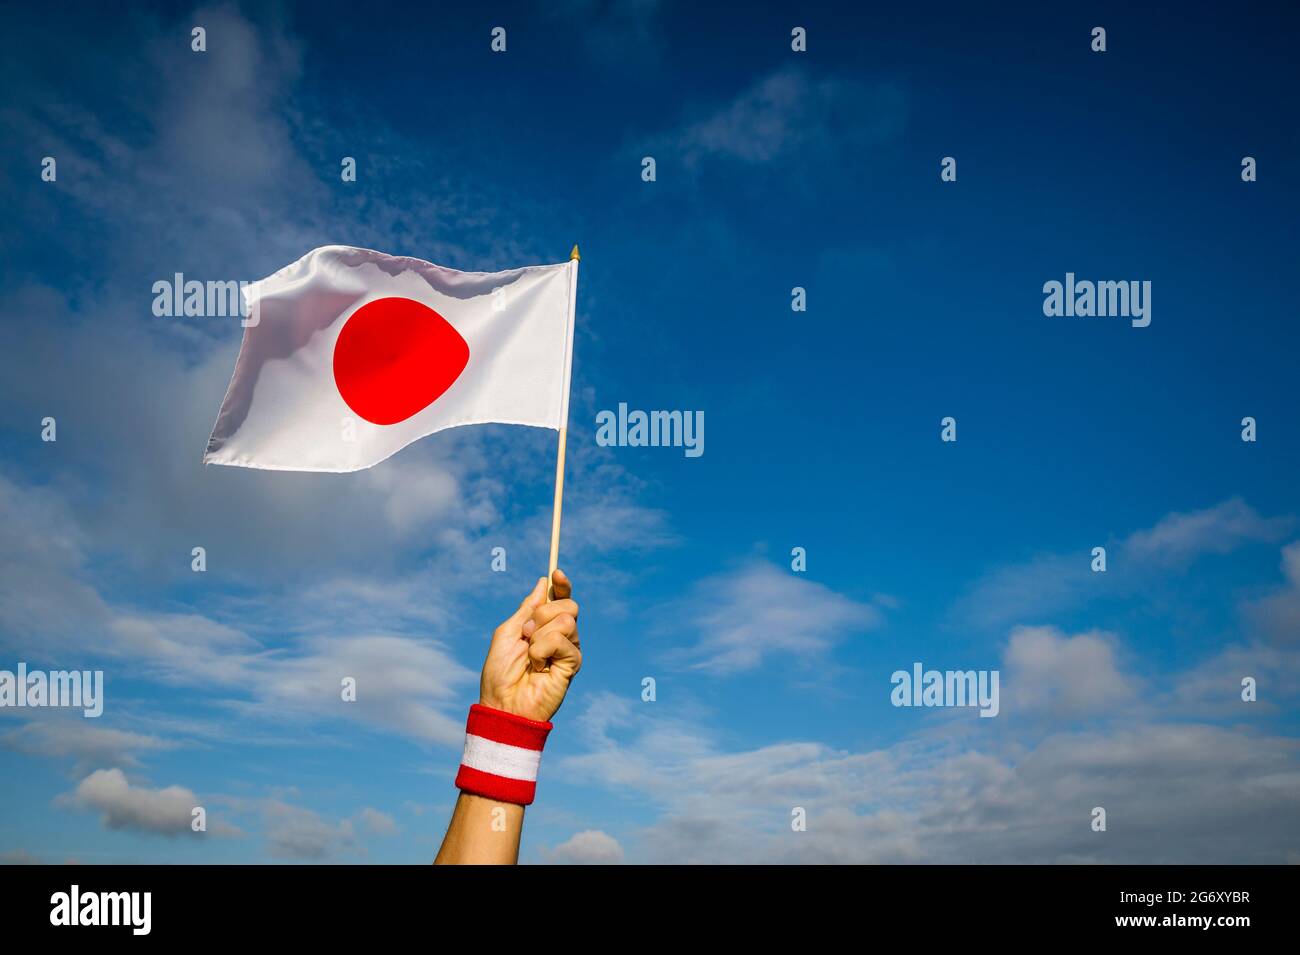 Japanese athlete with red and white wristband proudly holding national flag of Japan waving in bright sunny blue sky Stock Photo